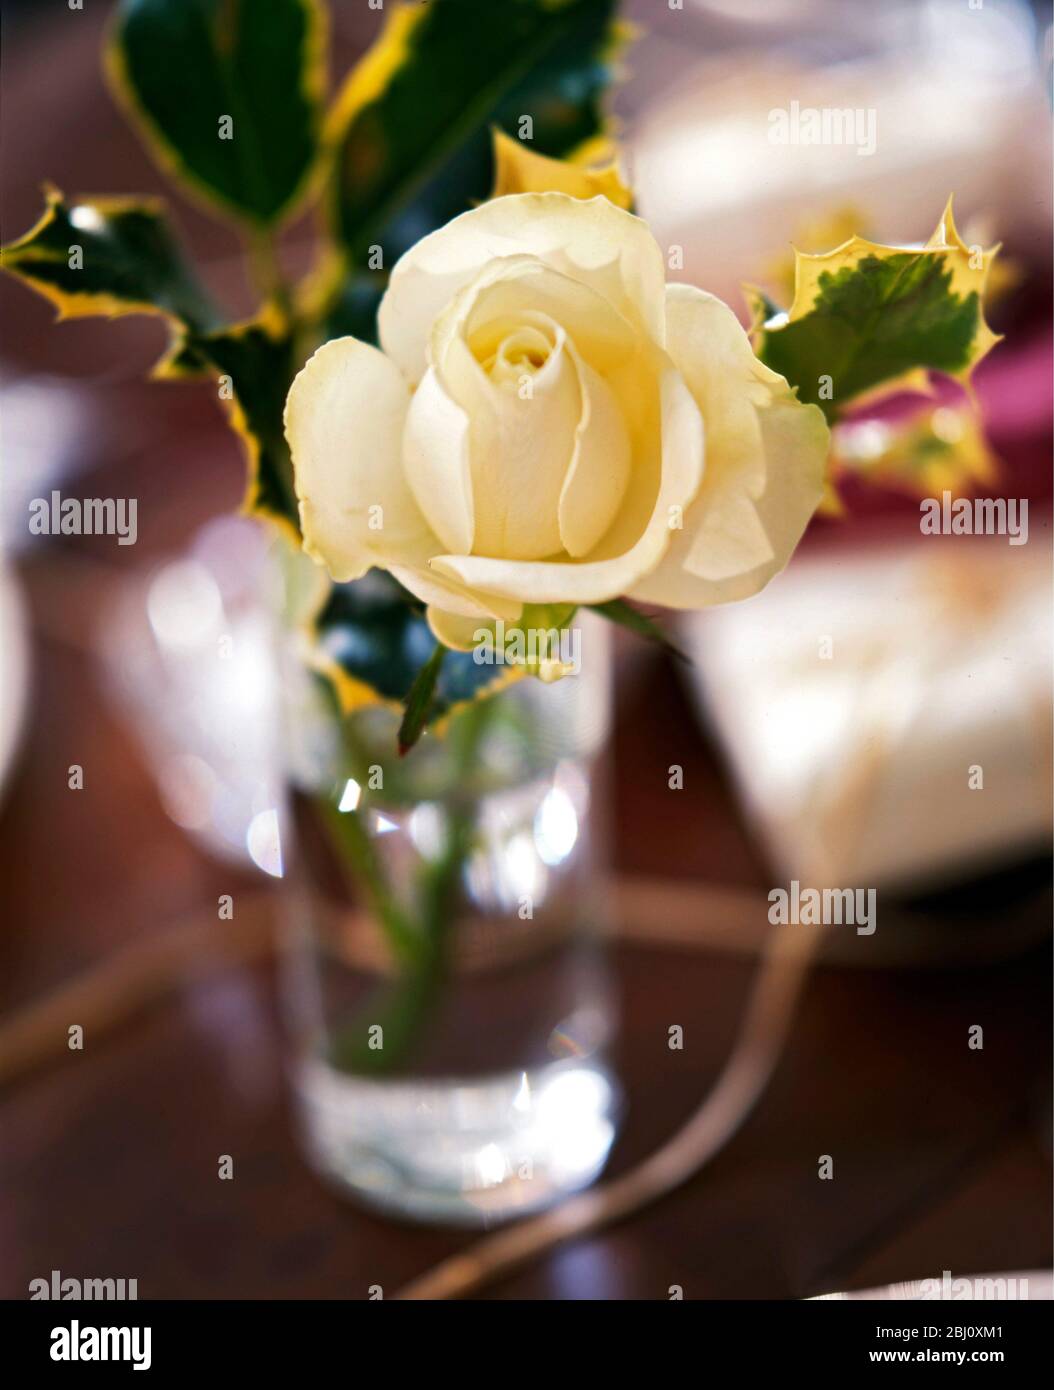 Creamy white roses with variegated holly leaves in small glass as christmas table decoration - Stock Photo